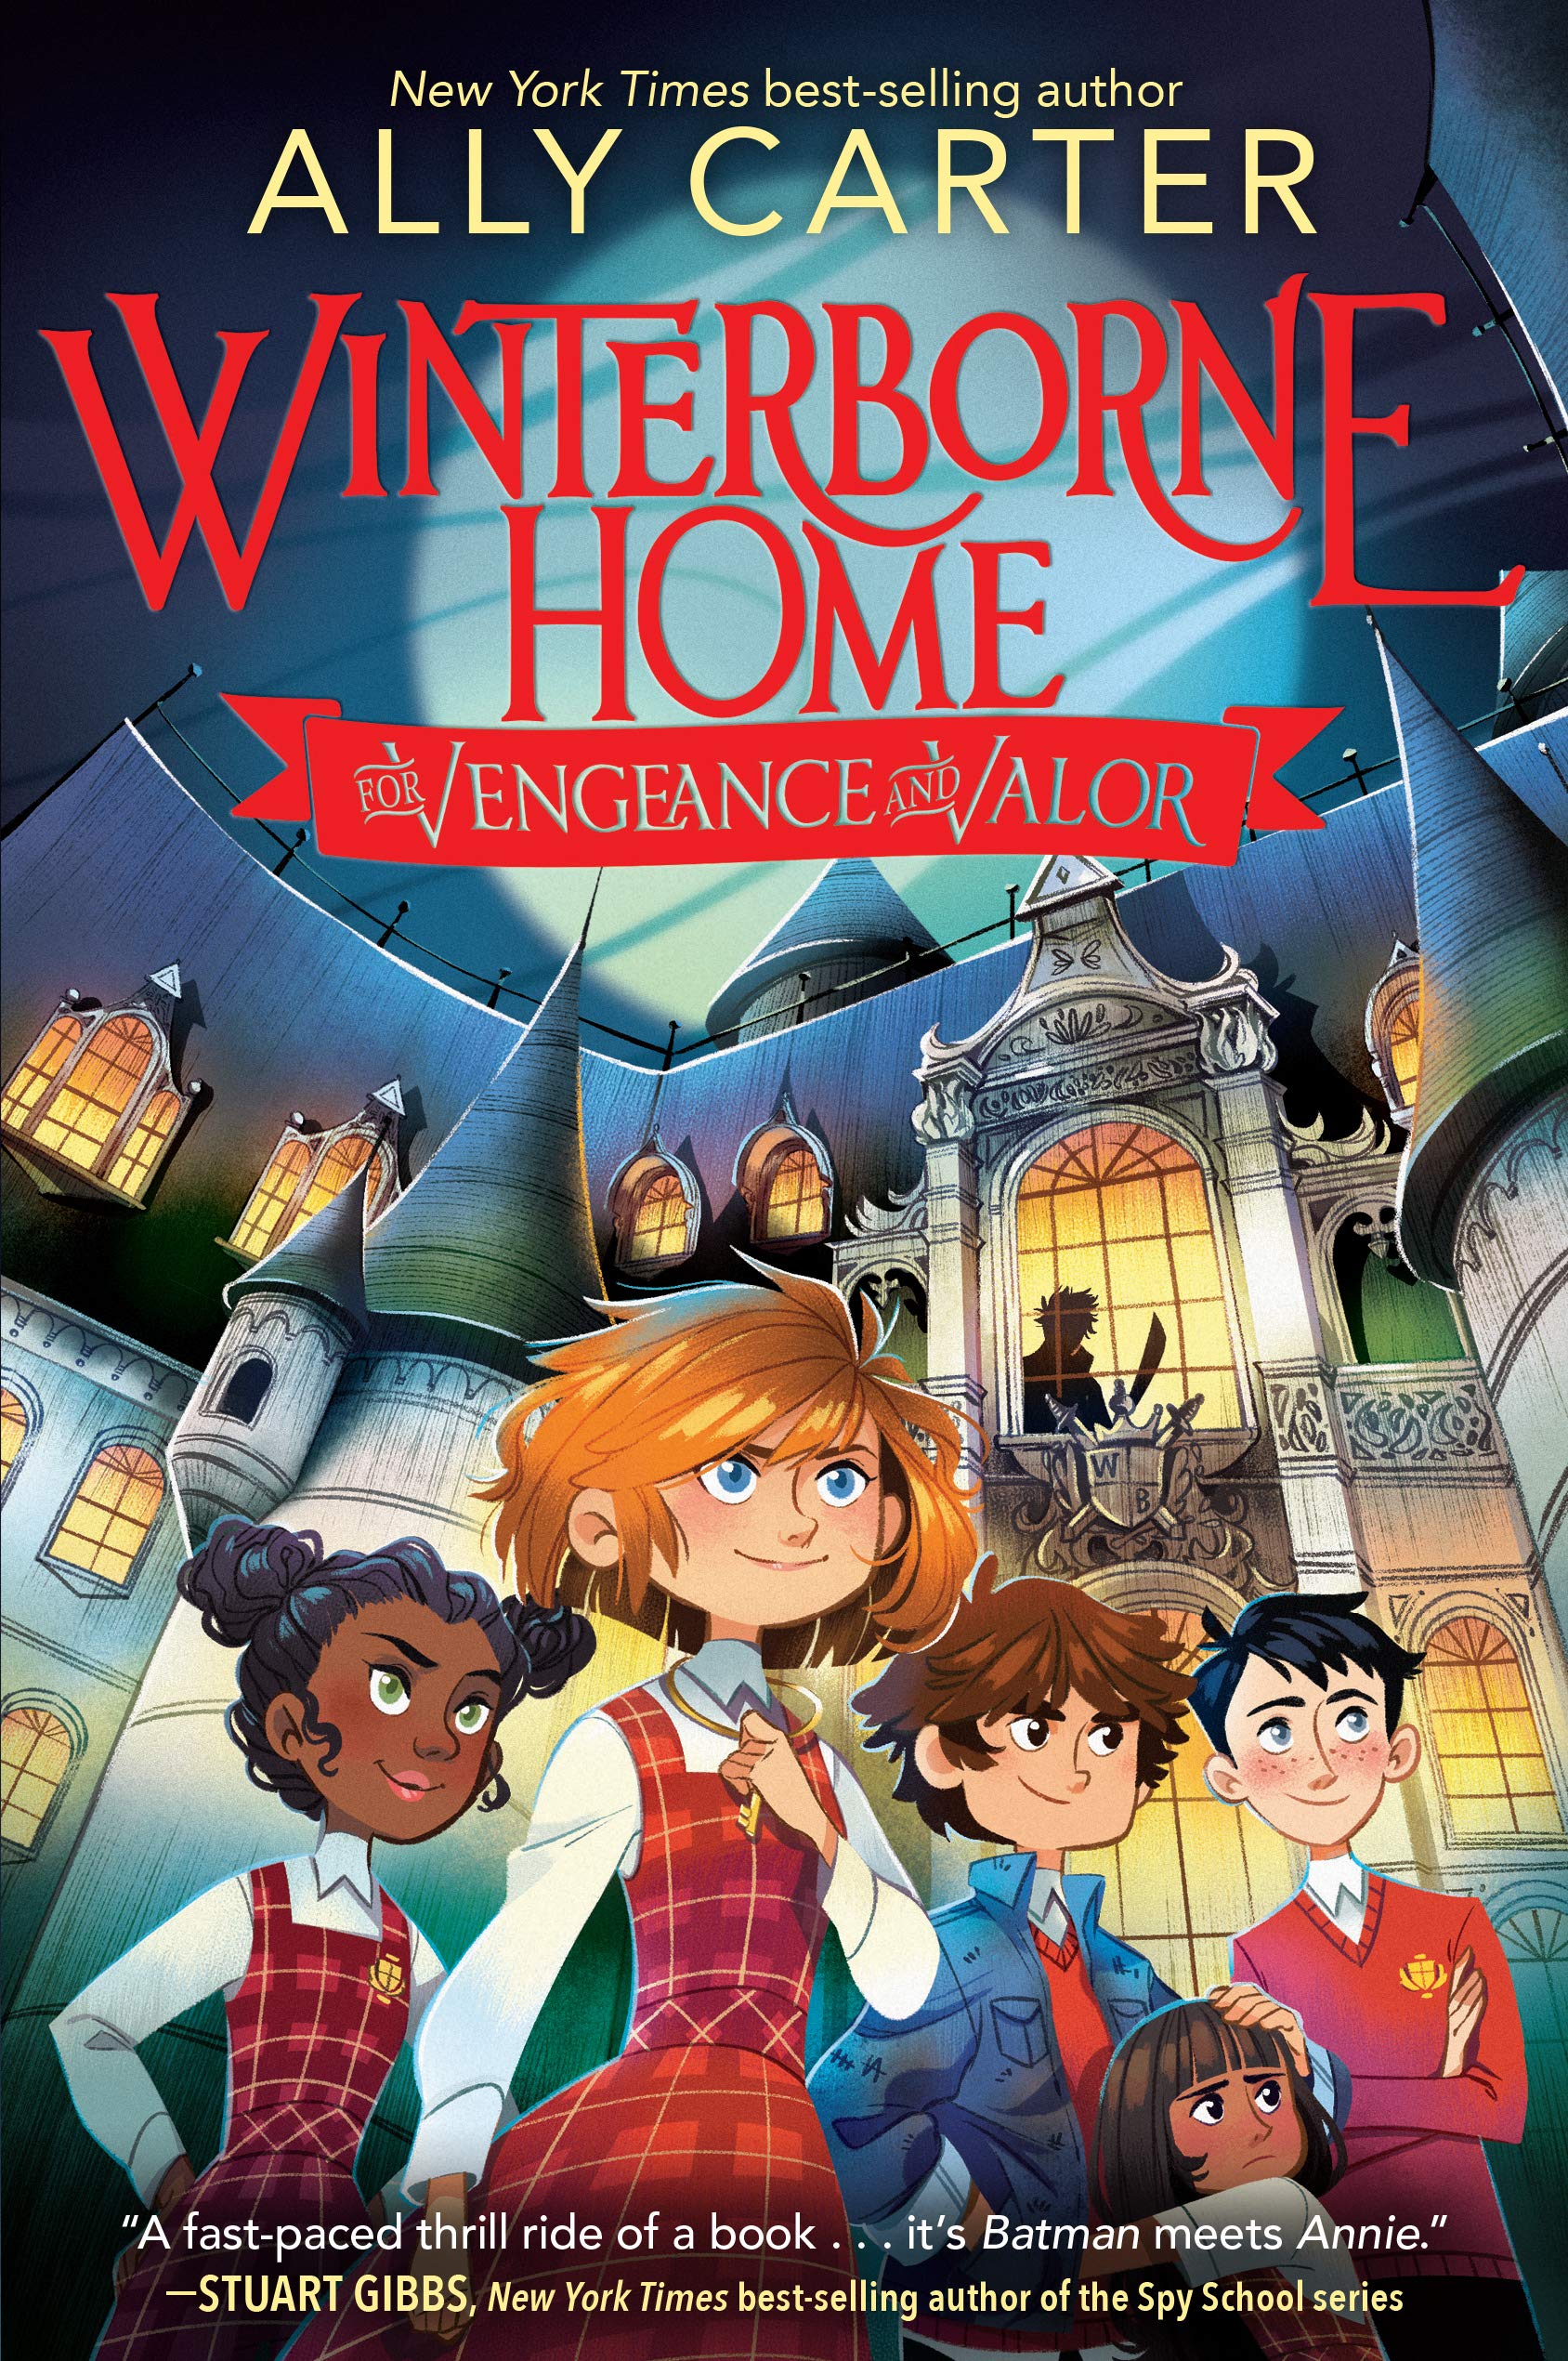 Winterborne Home book cover shows children standing in front of a large mansion.